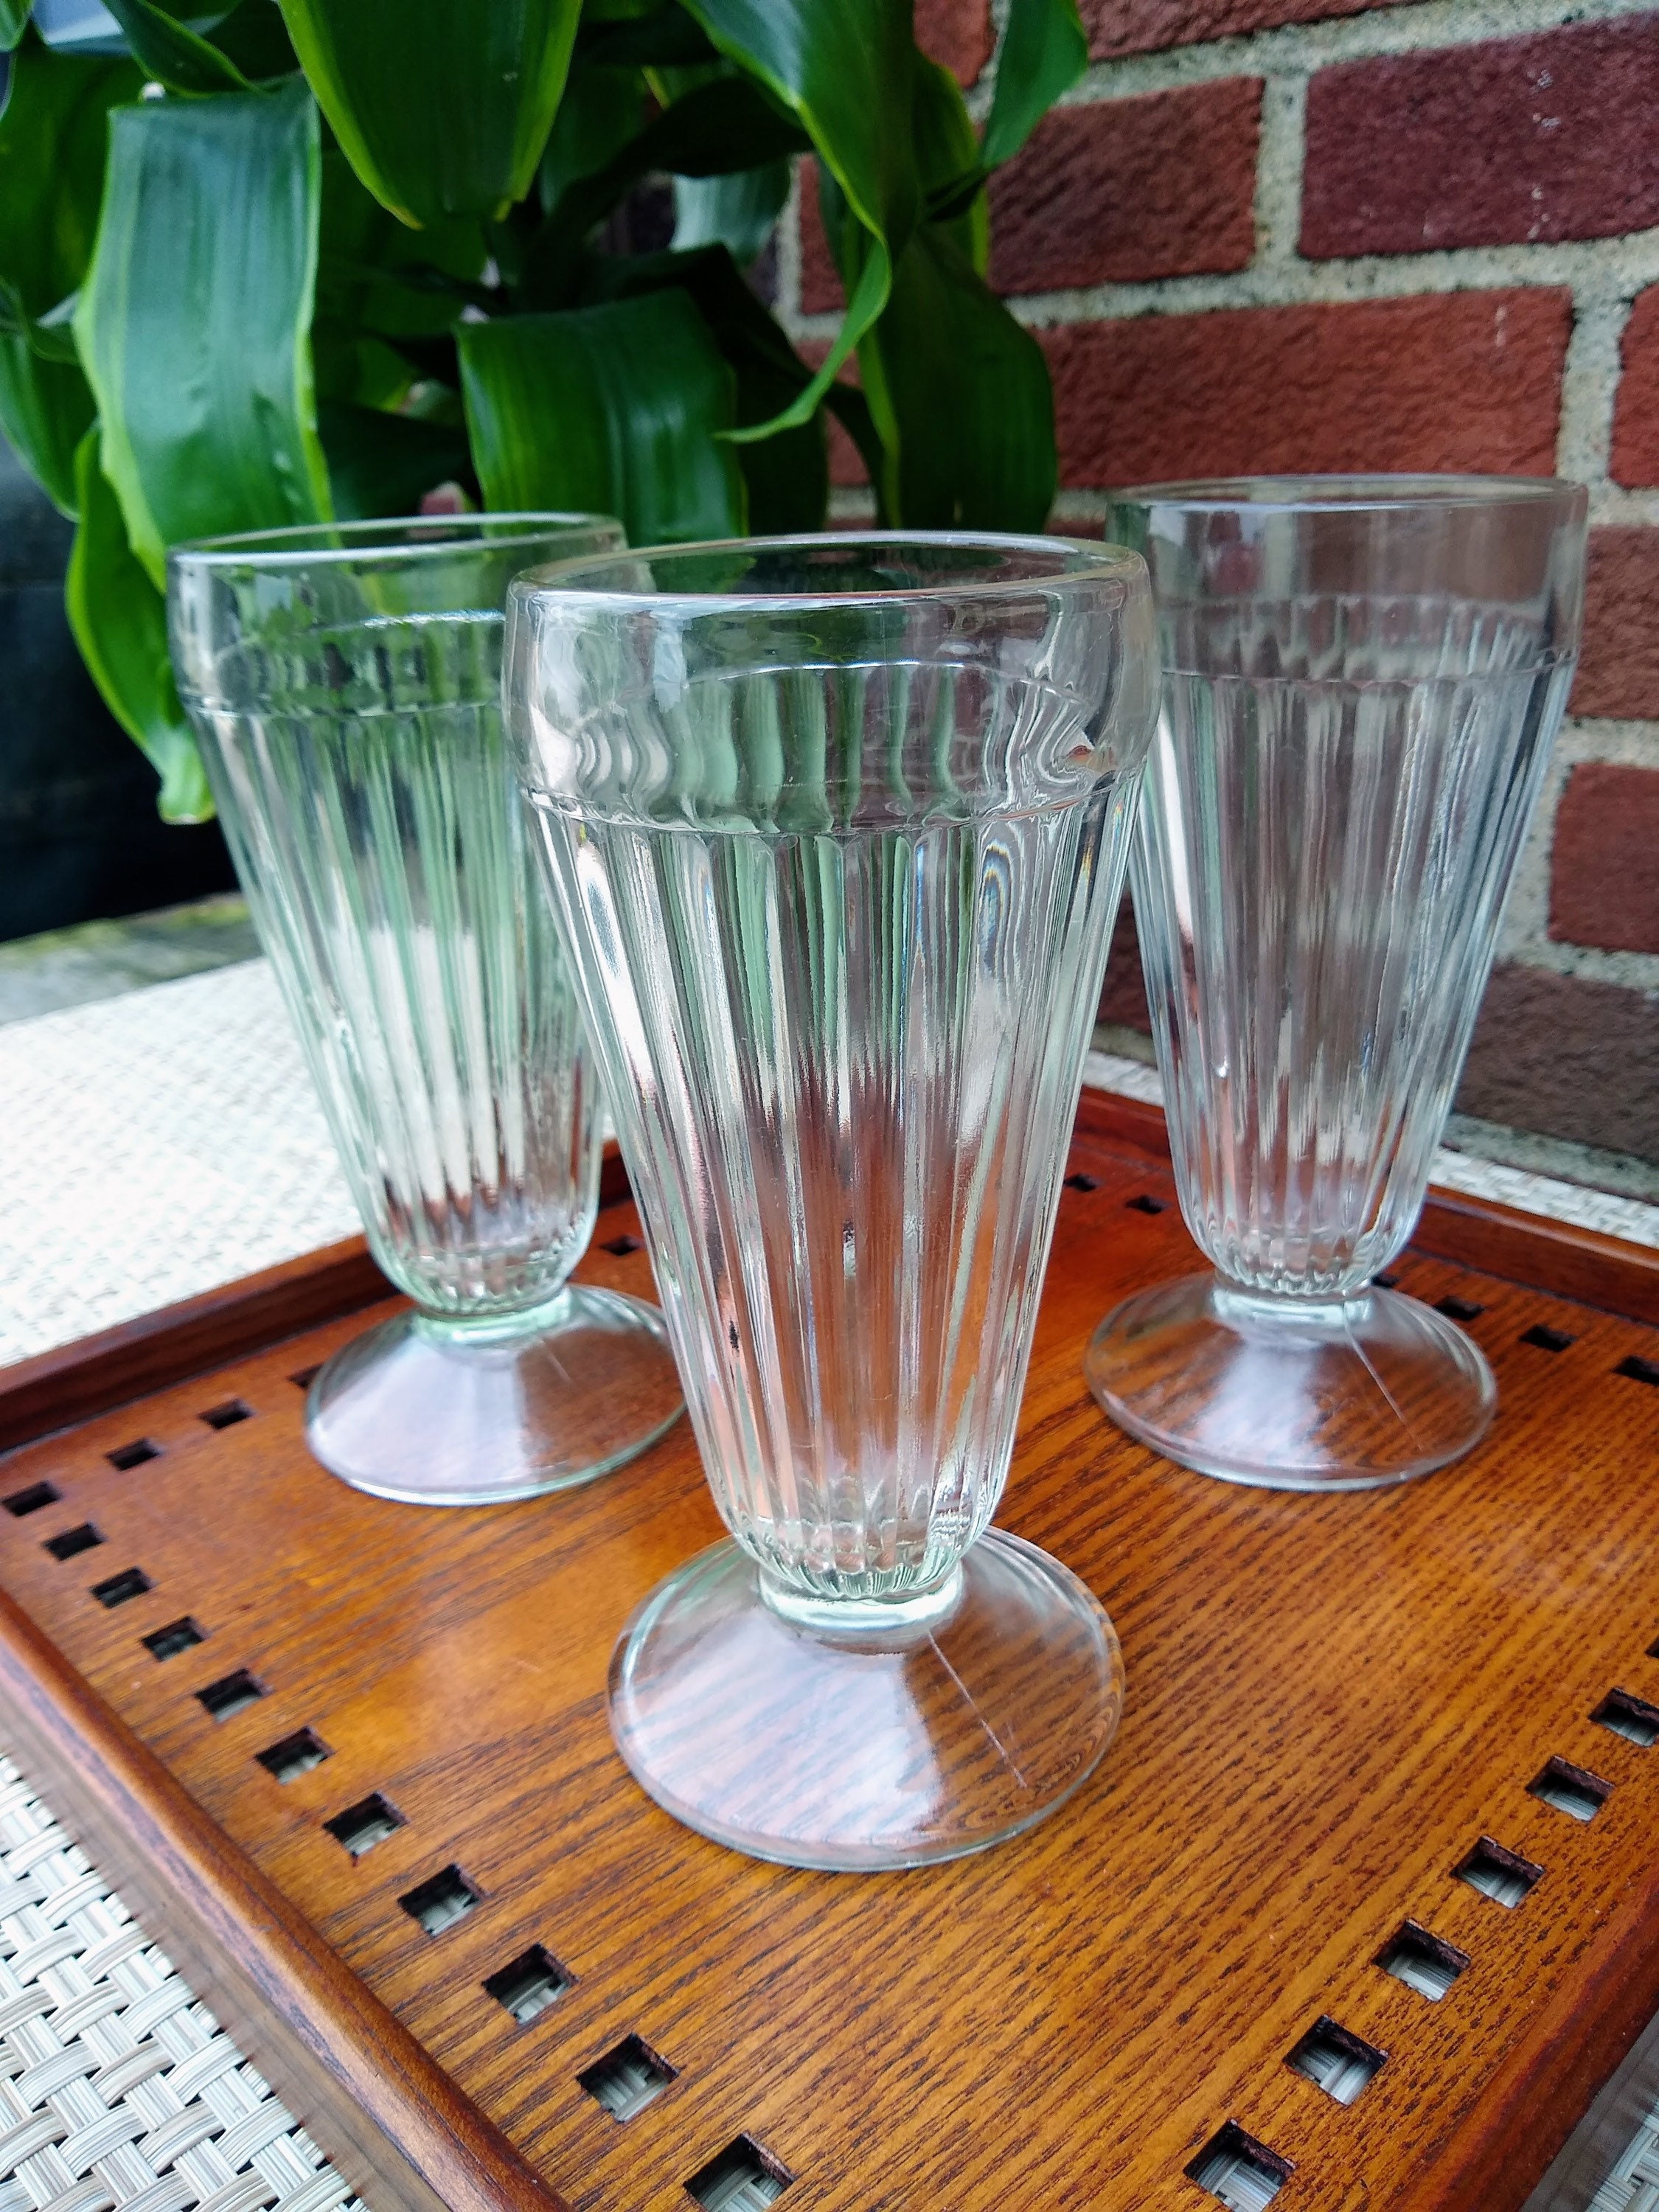 KEMORELA Ribbed Glassware Drinking Glasses - Set of 8 Vintage Cute Glass  Cups - Ripple Rluted Aesthe…See more KEMORELA Ribbed Glassware Drinking